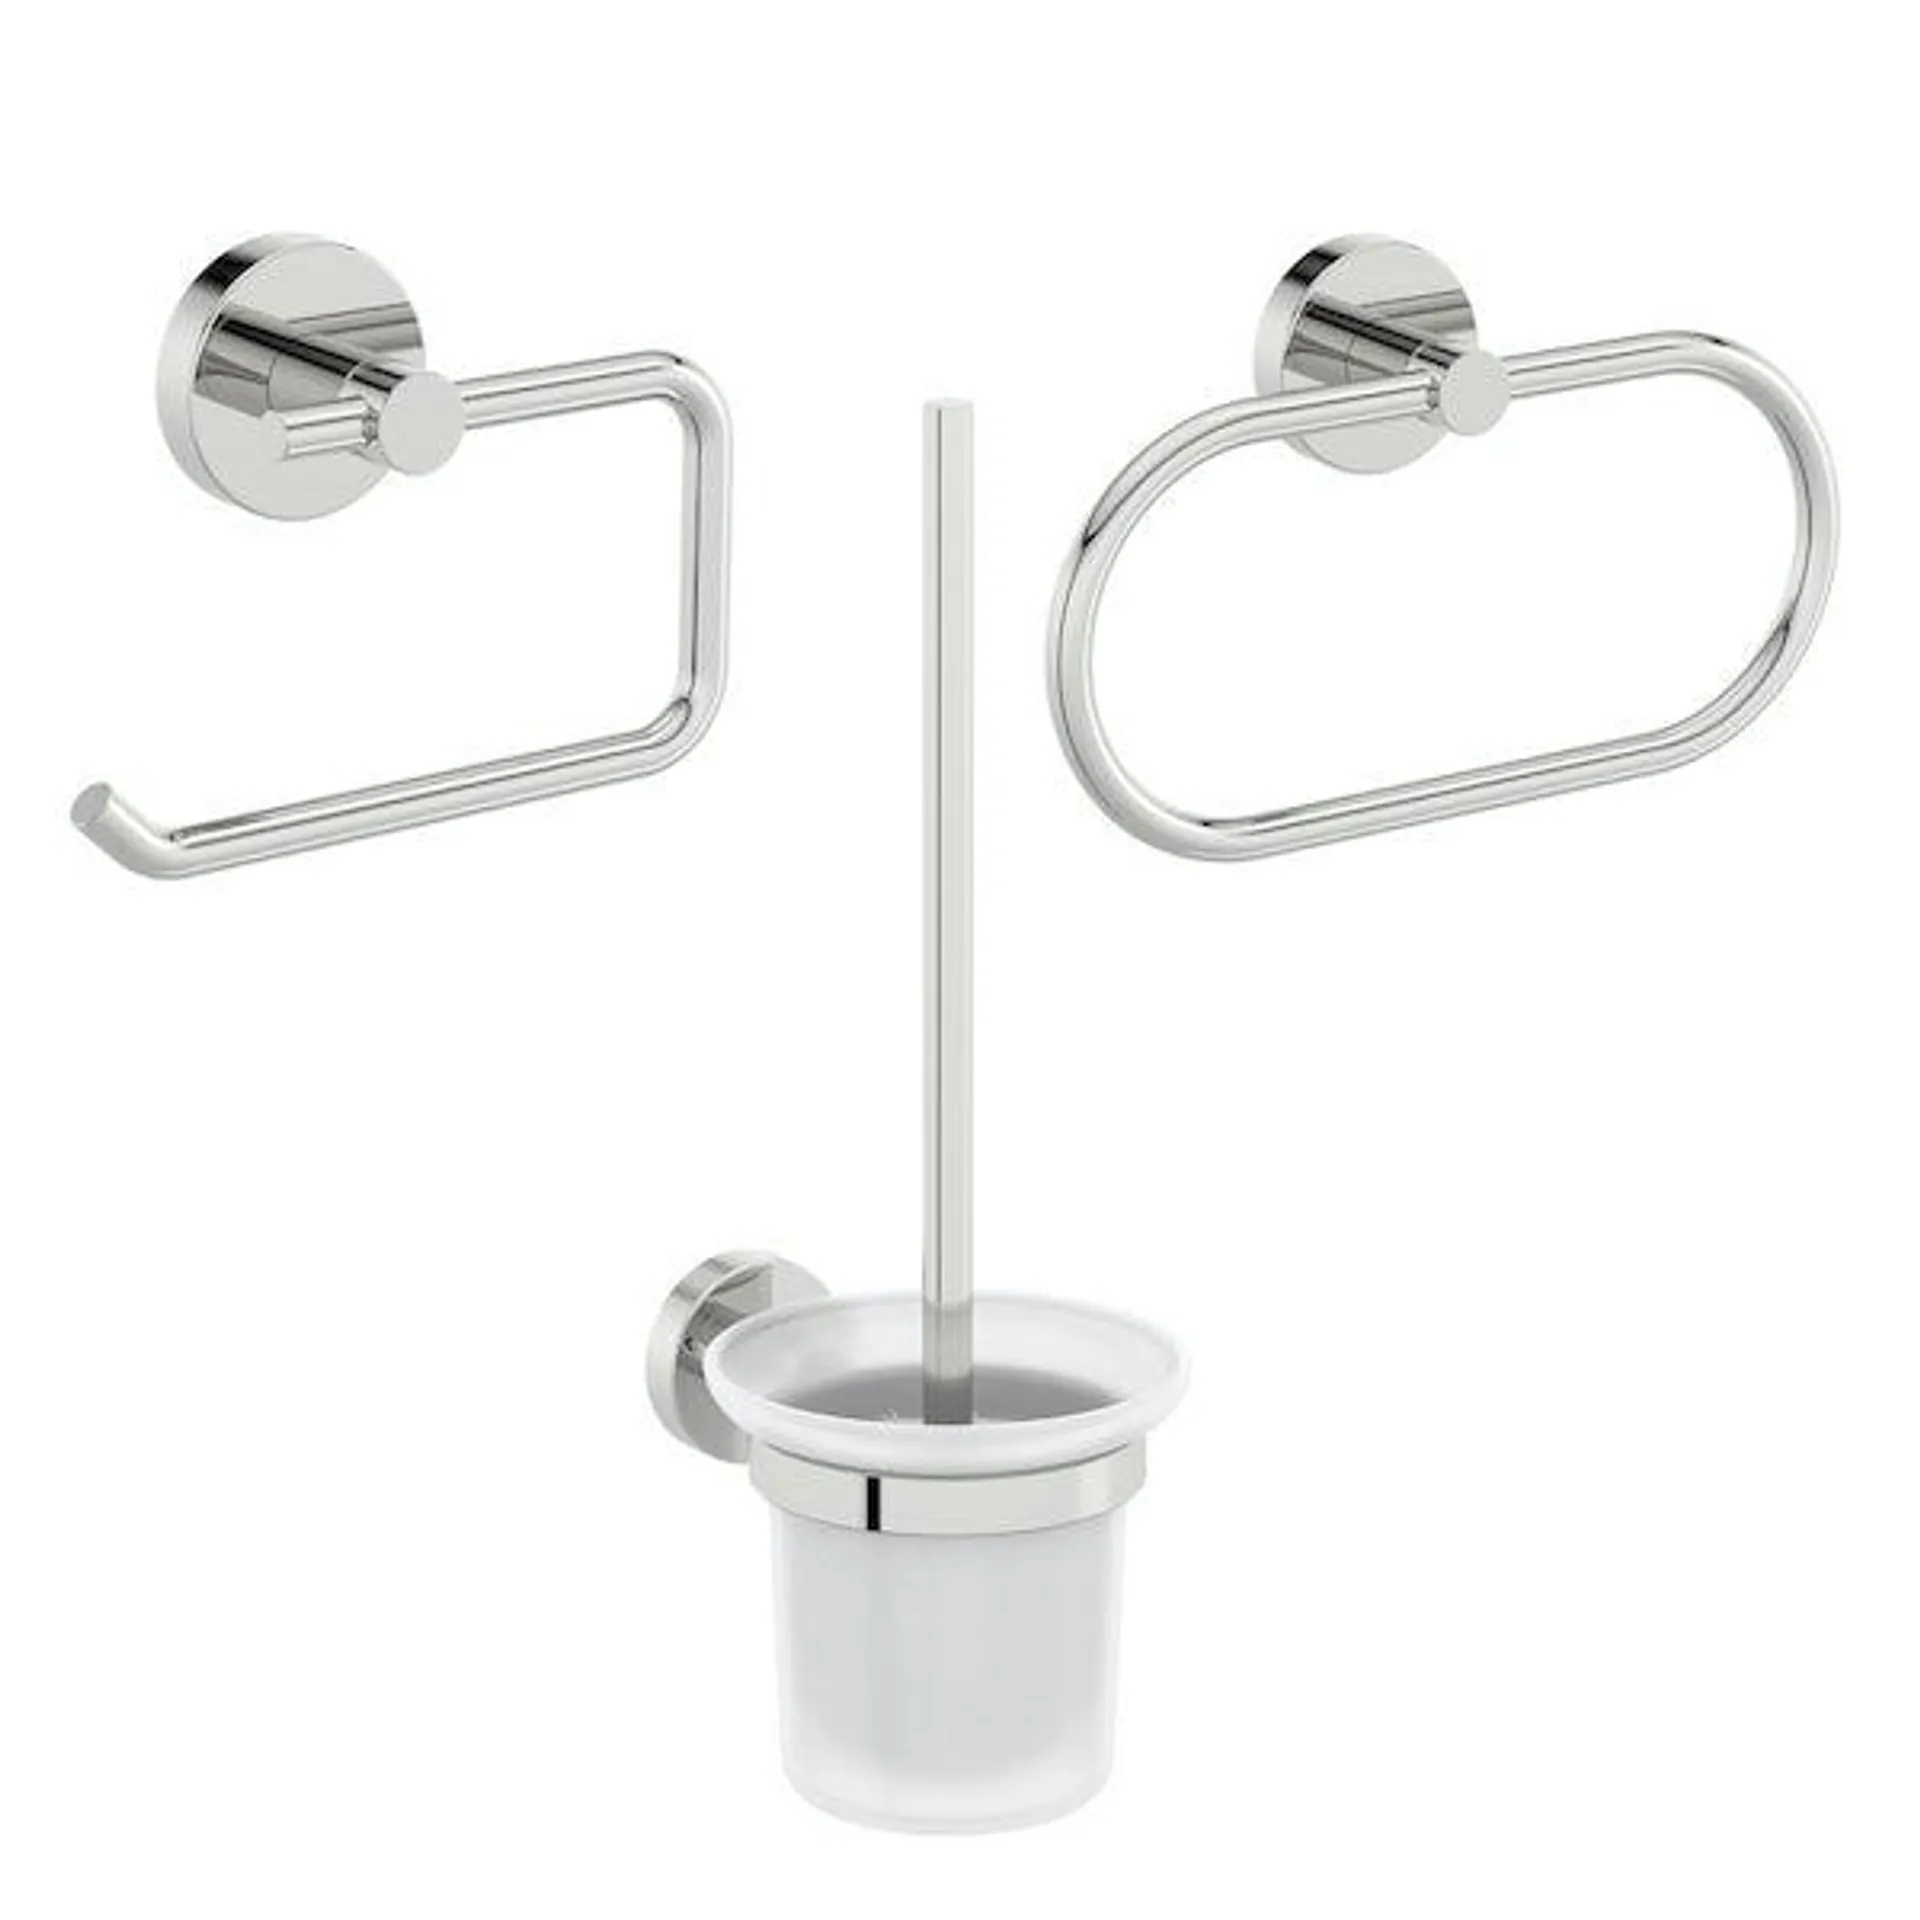 Accents Round cloakroom toilet accessory set